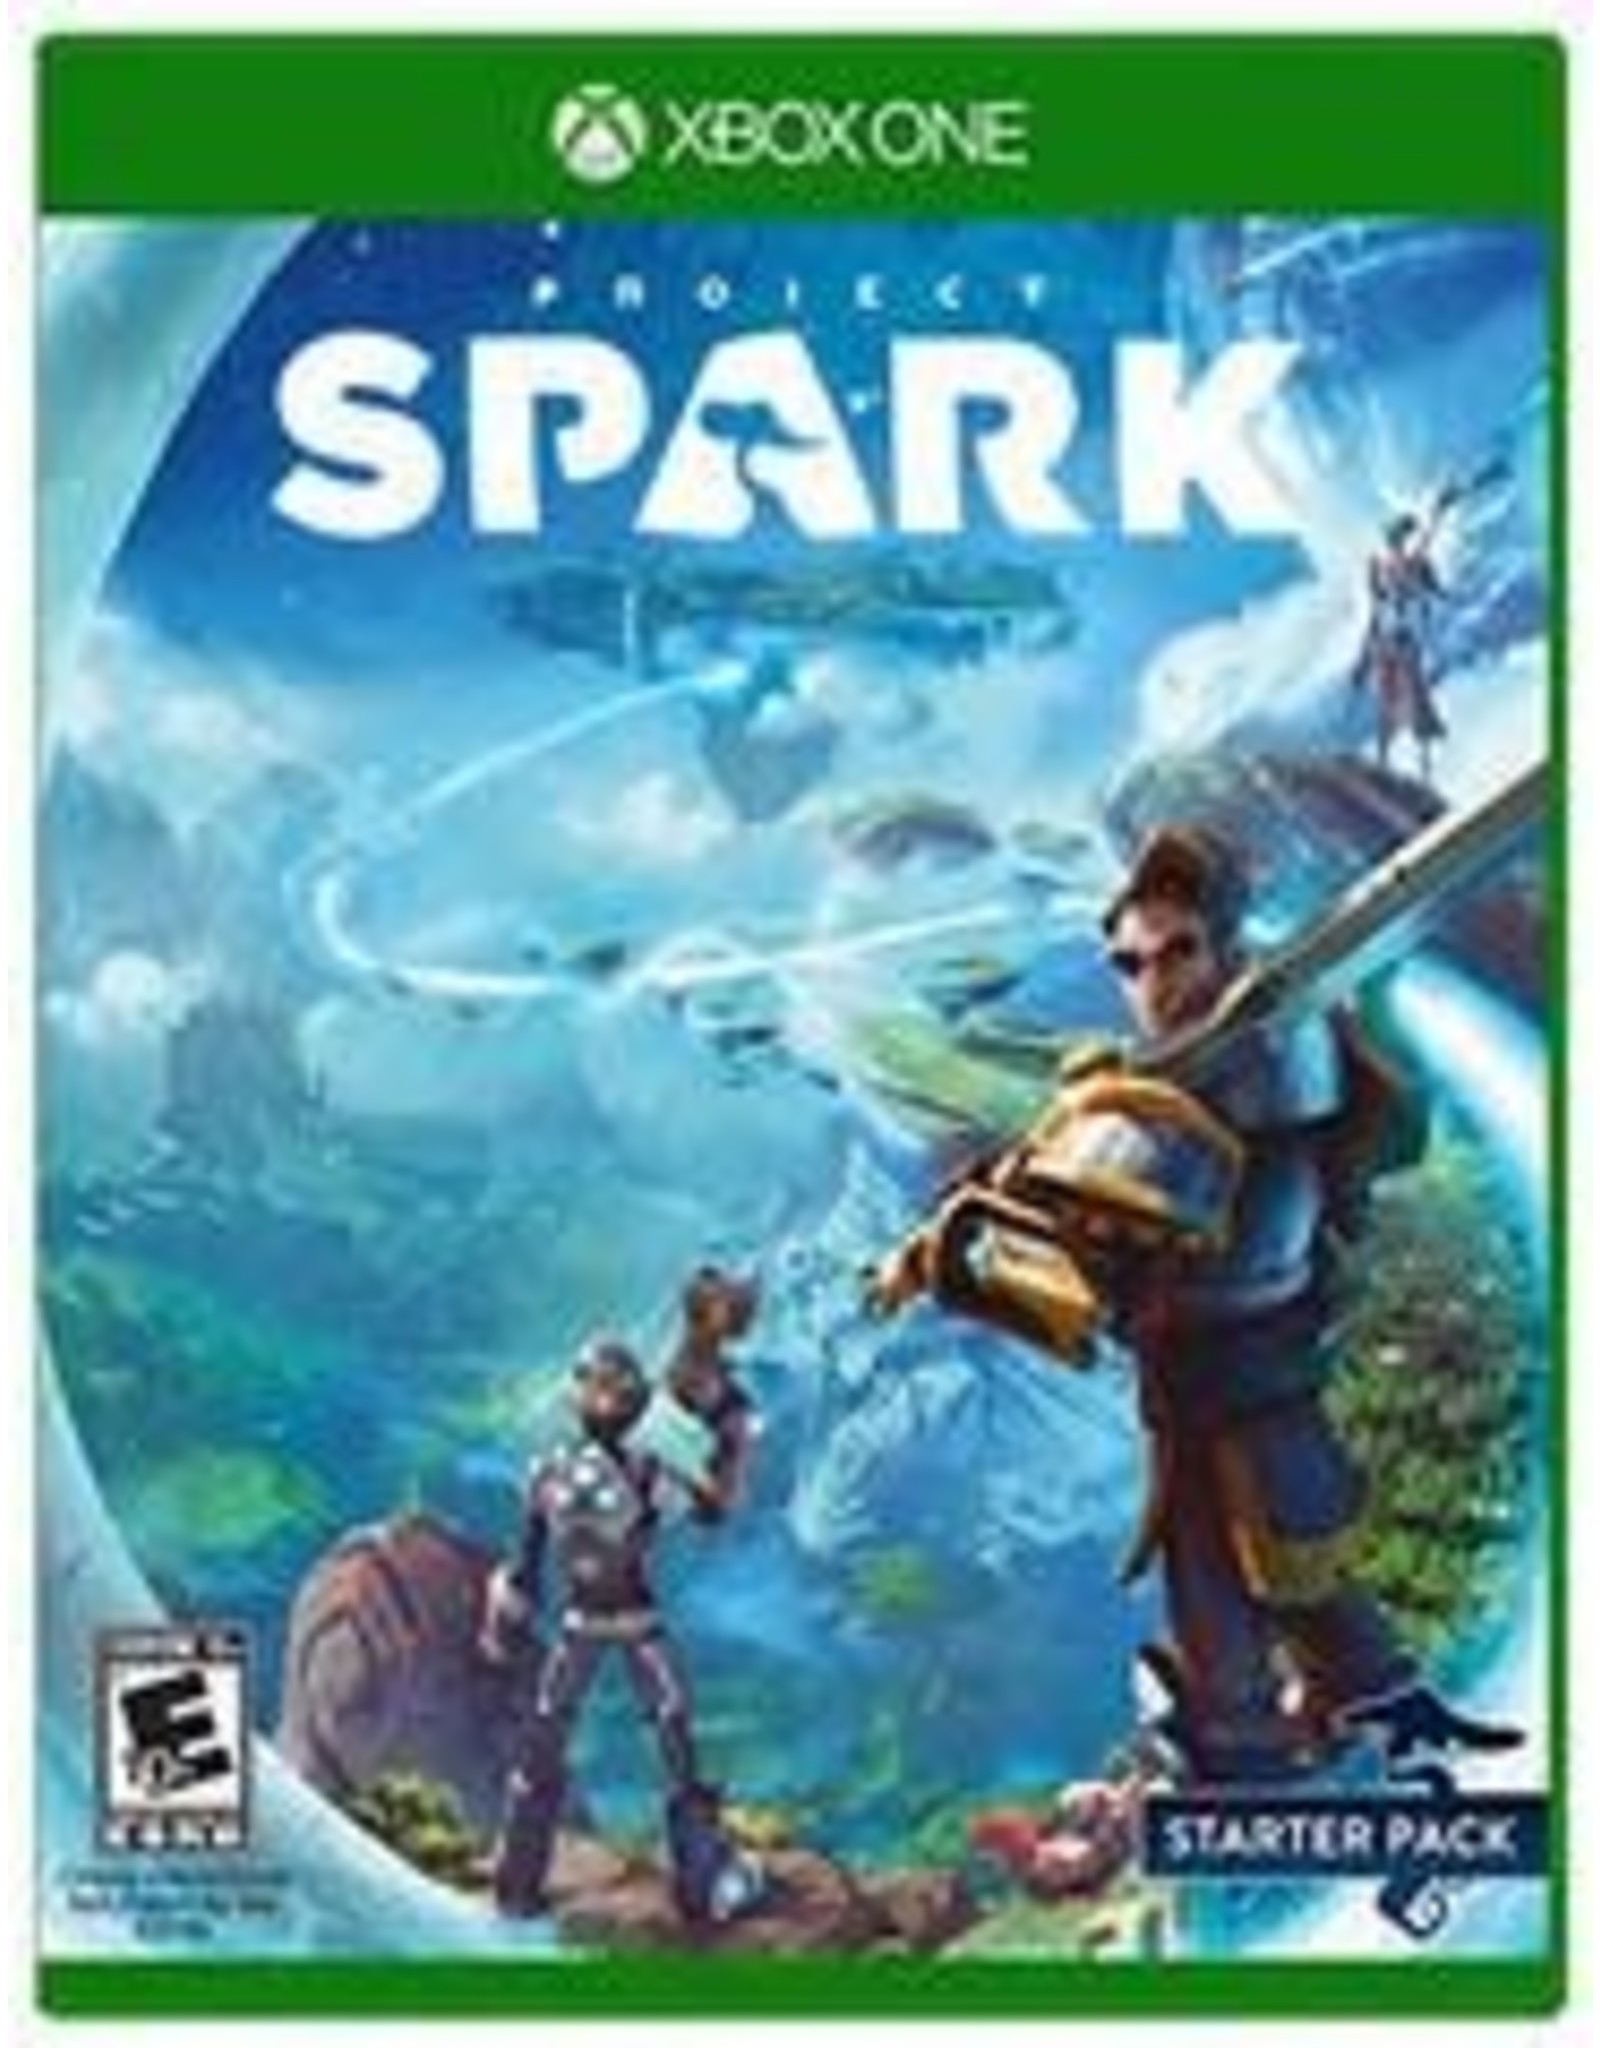 Xbox One Project Spark (Used)